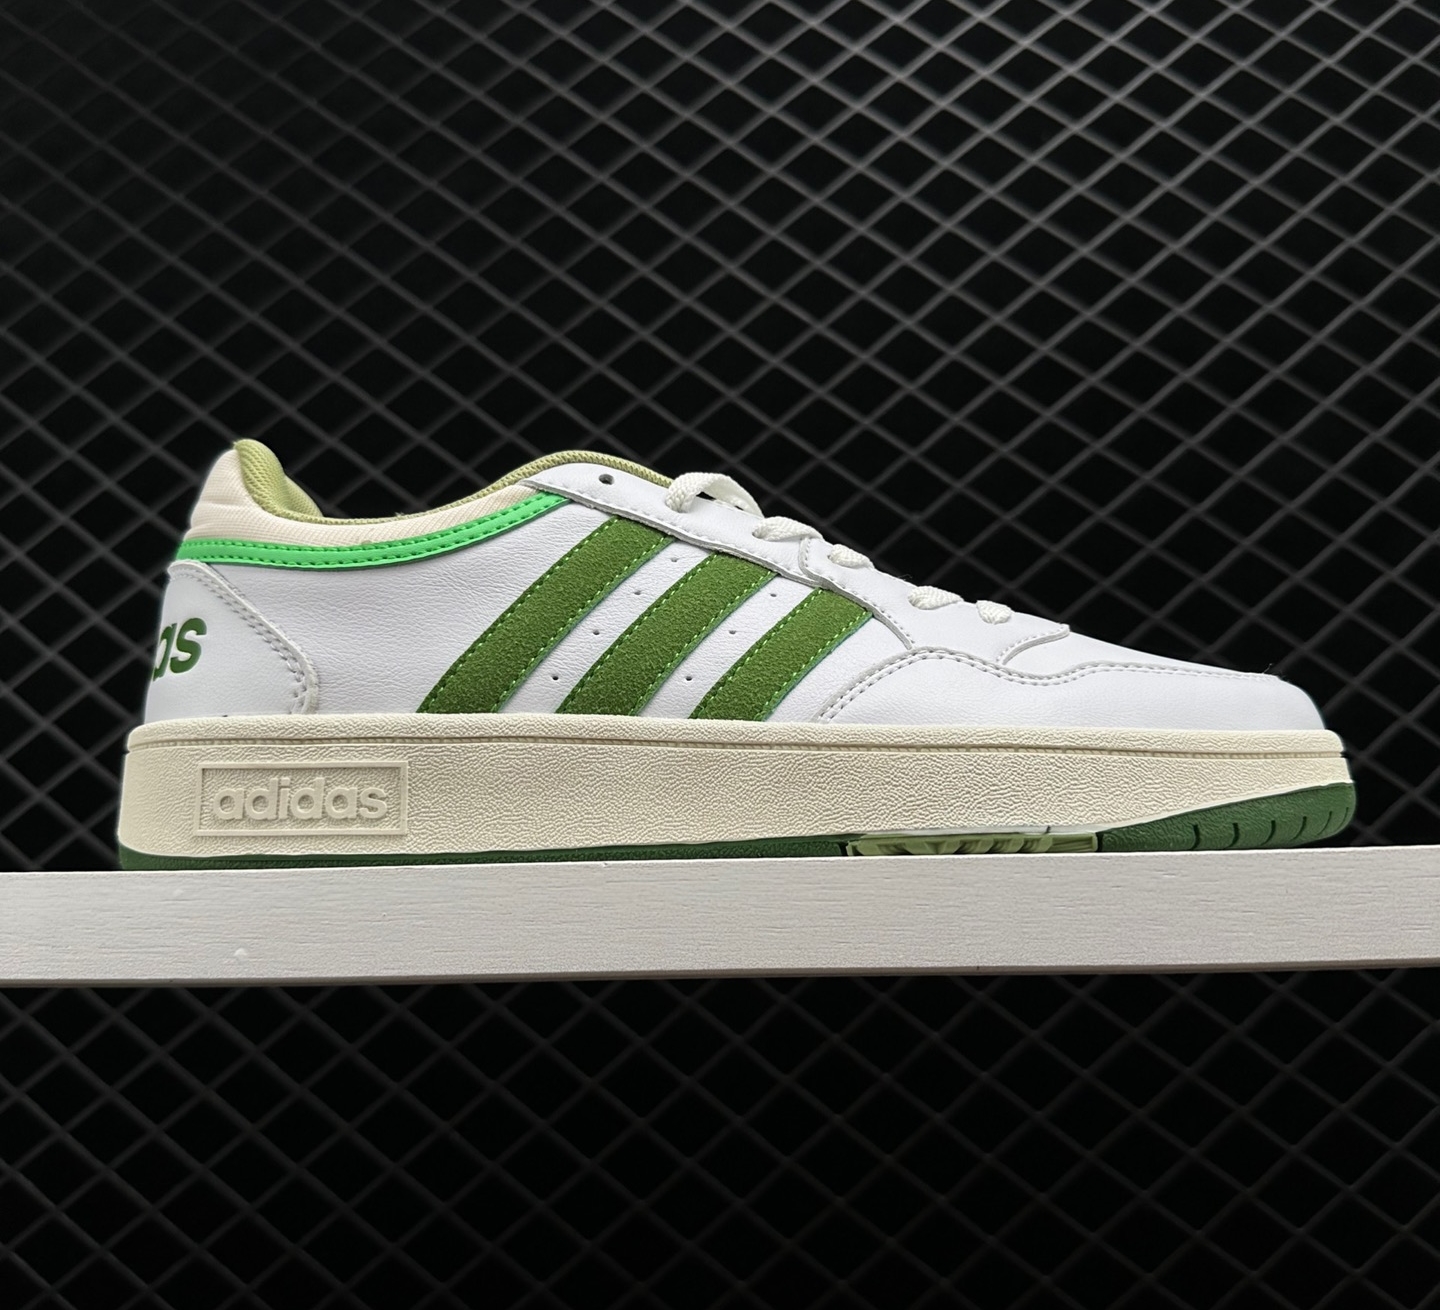 Adidas Neo Hoops 3.0 'White Green' GX9773 - Stylish and Sporty Footwear for Men